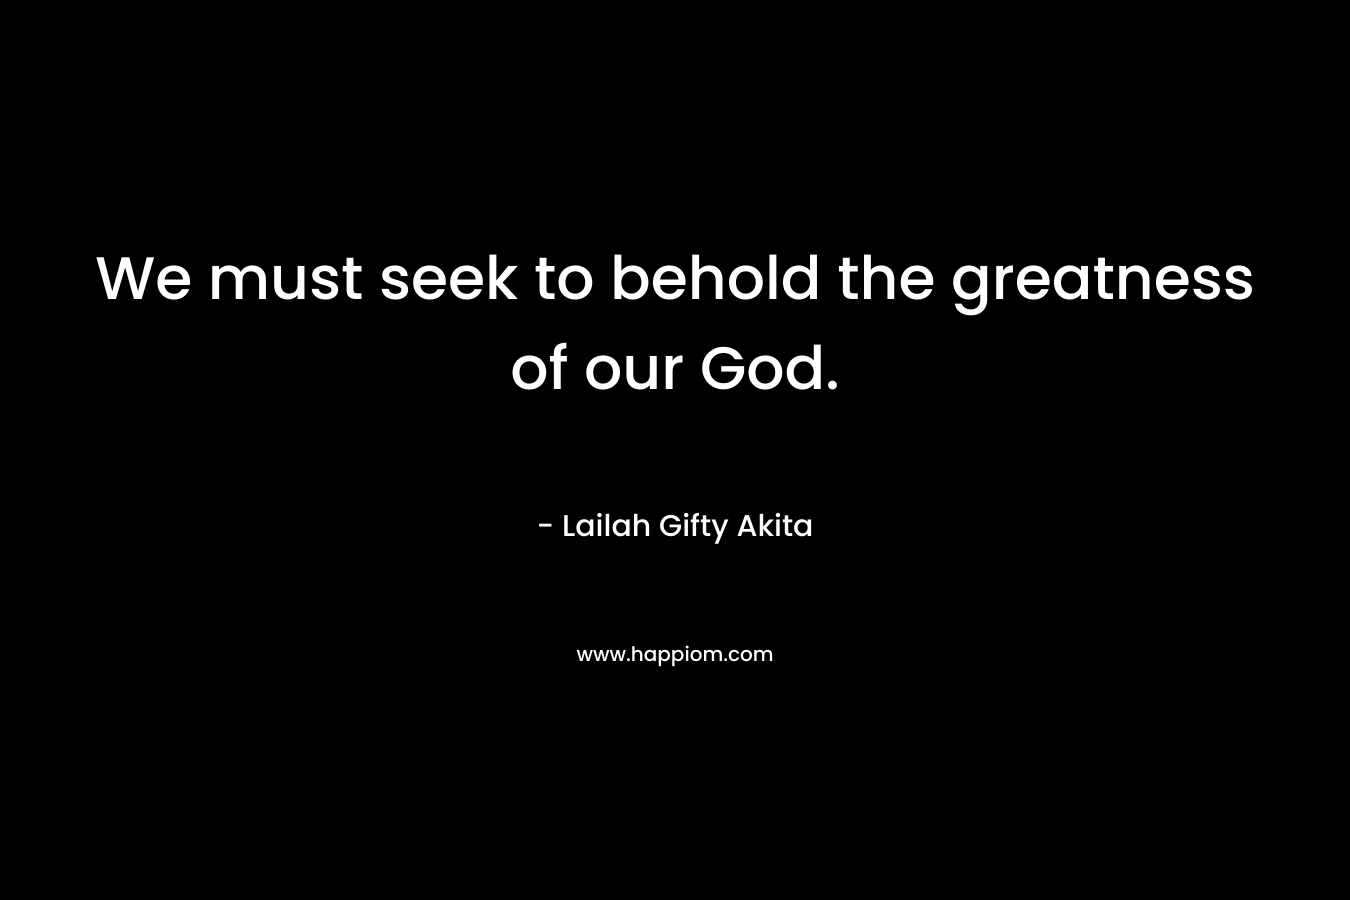 We must seek to behold the greatness of our God.